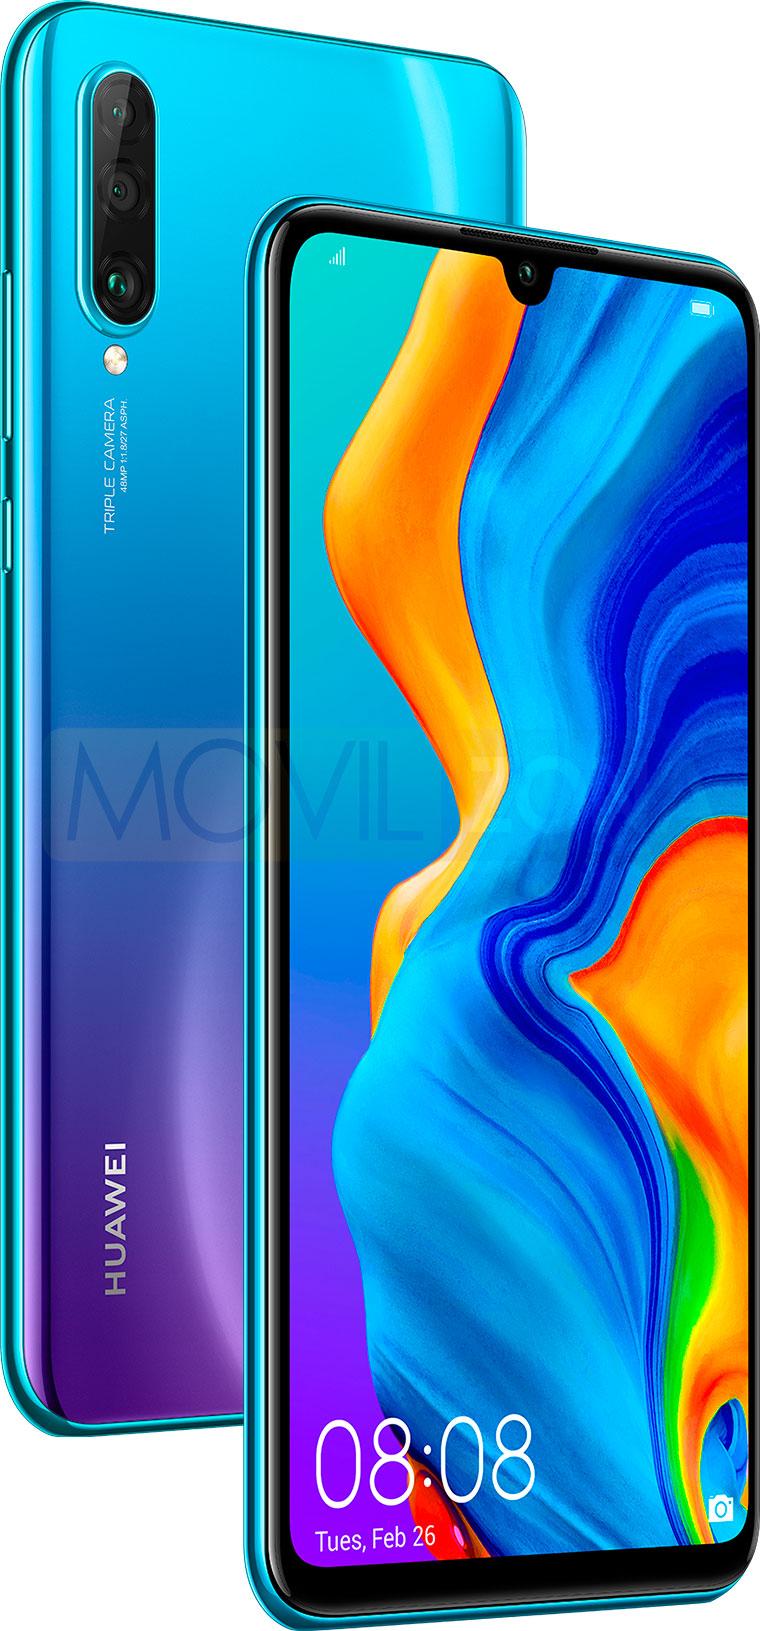 Huawei P30 Lite New Edition color